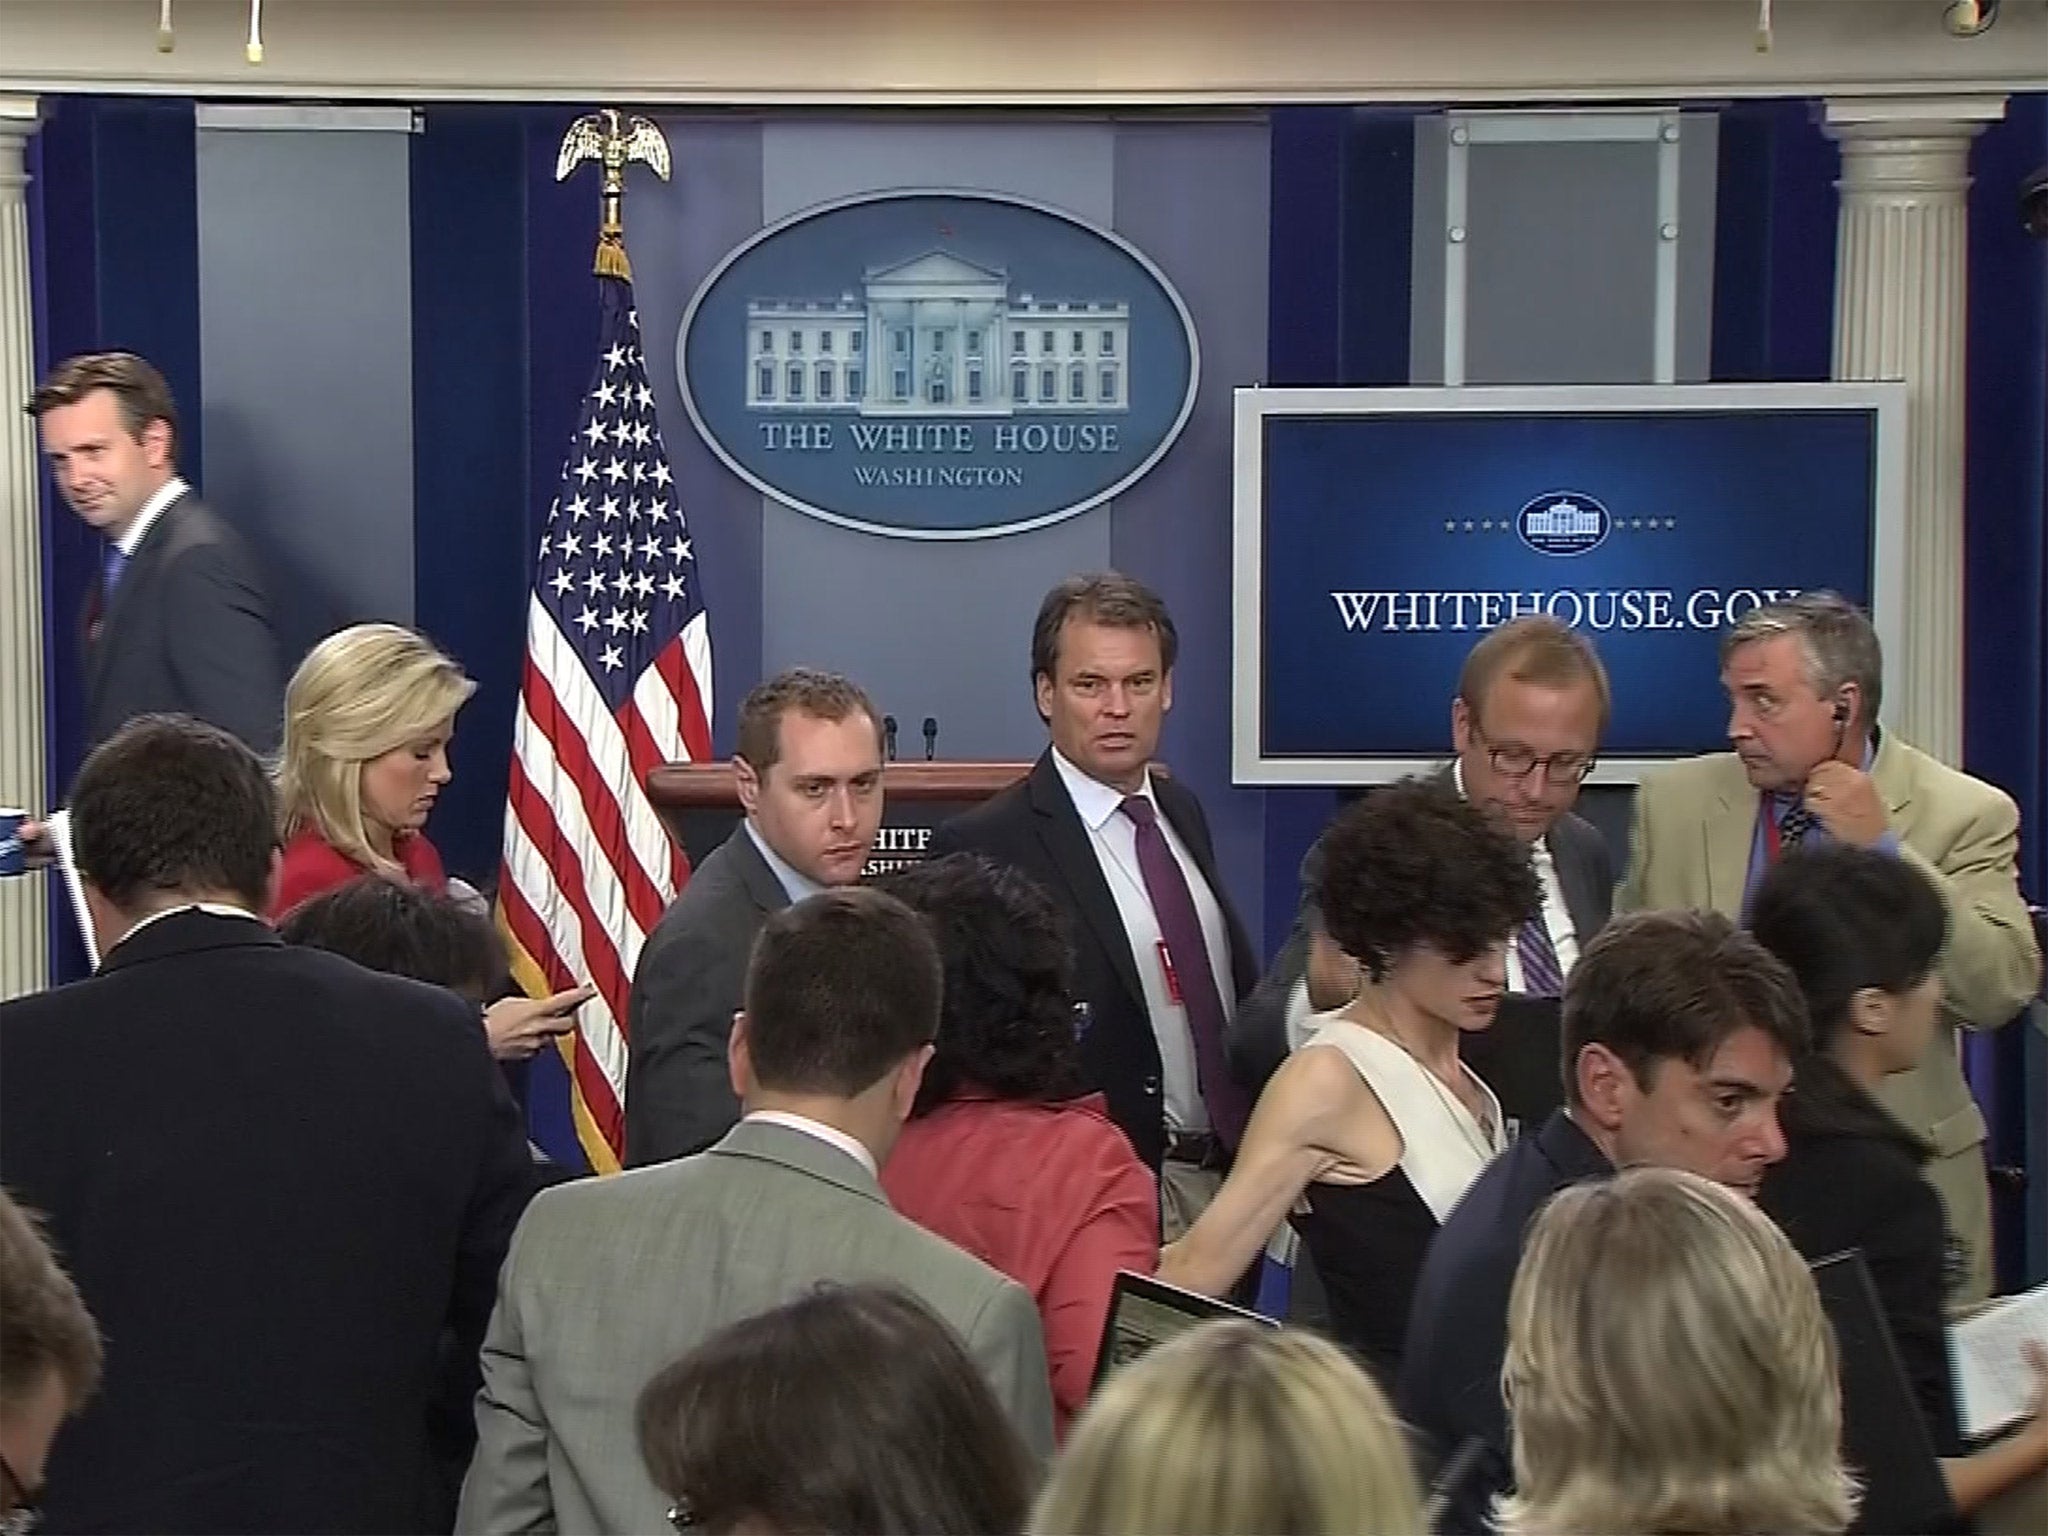 White House Press Secretary John Earnest and correspondents depart the White House press briefing room